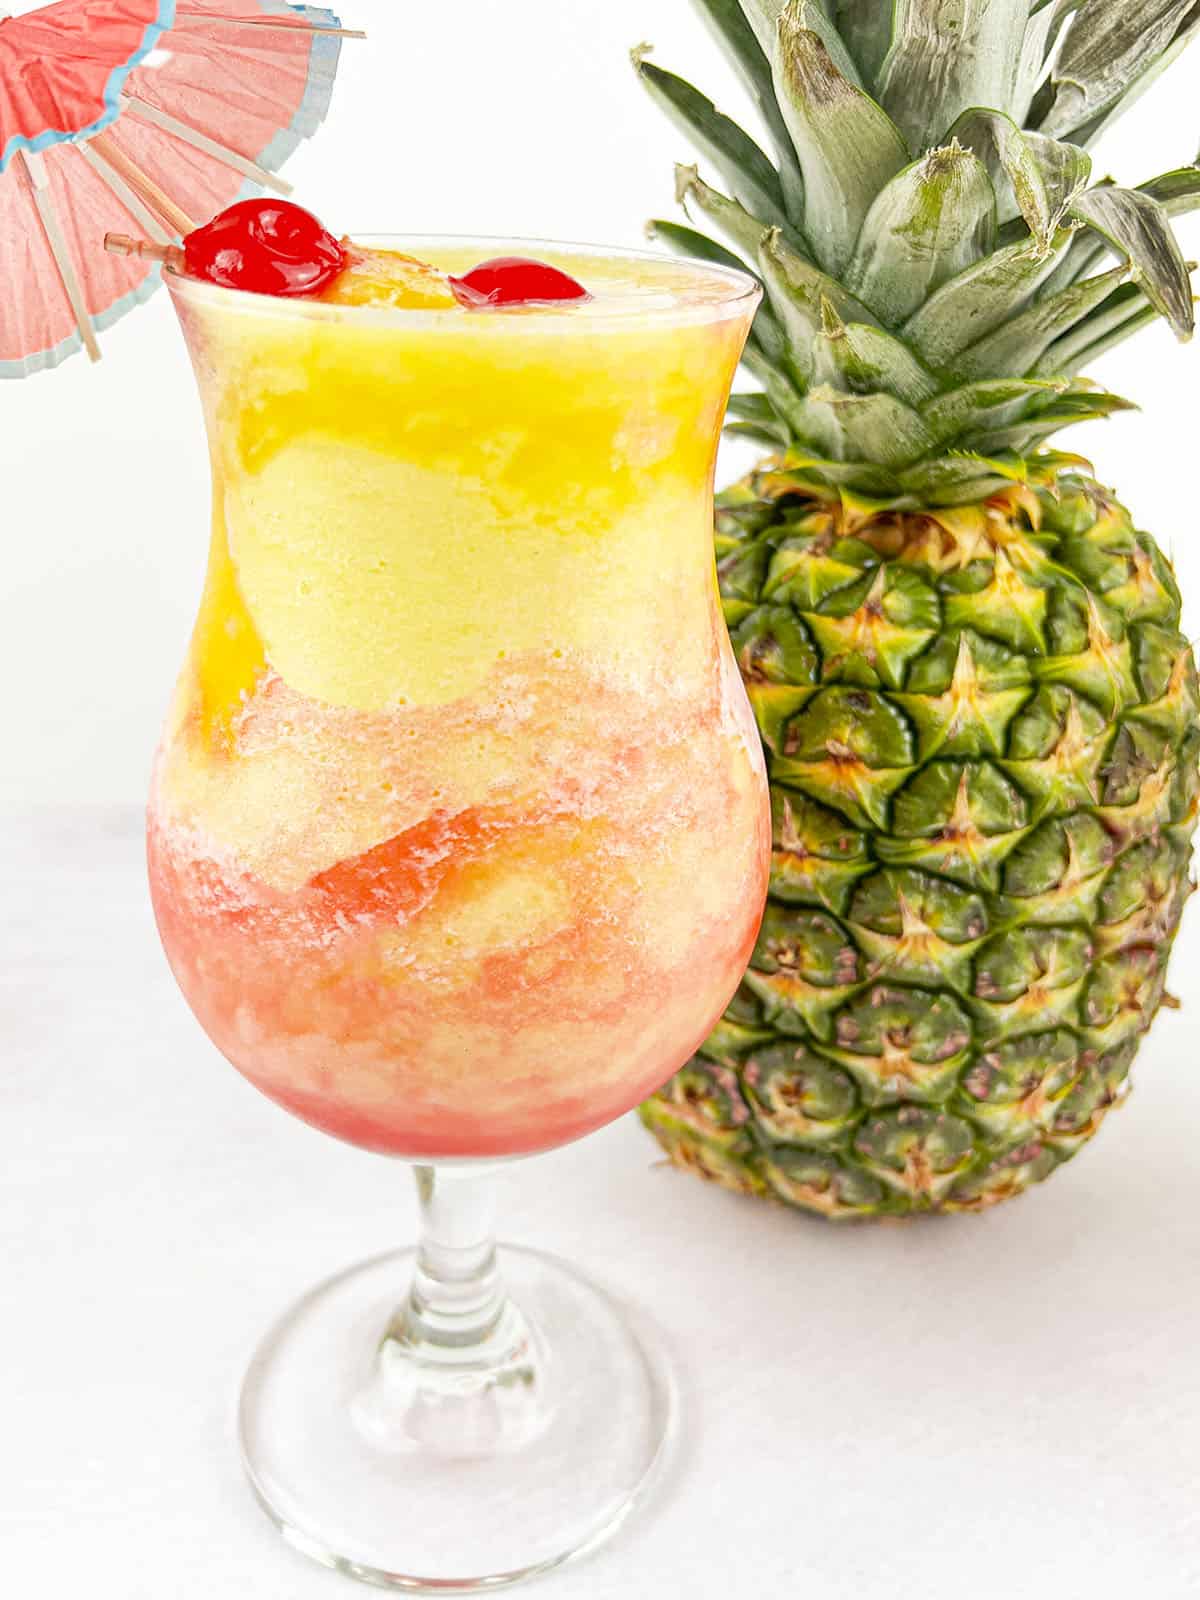 The fruity drink with cherries and a paper umbrella in the glass next to a pineapple.